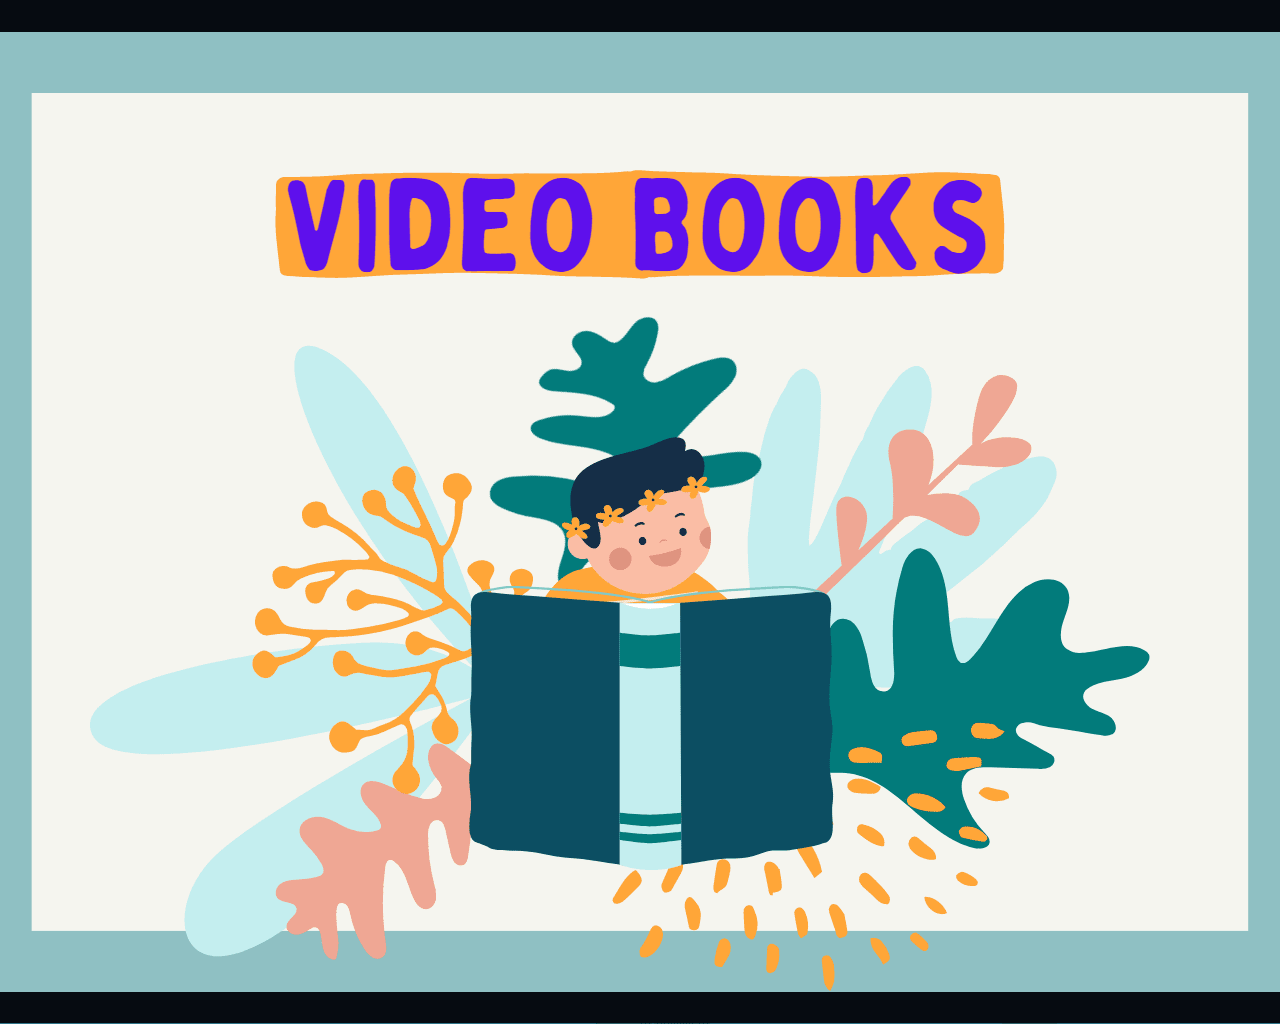 I will create a video article book letter story